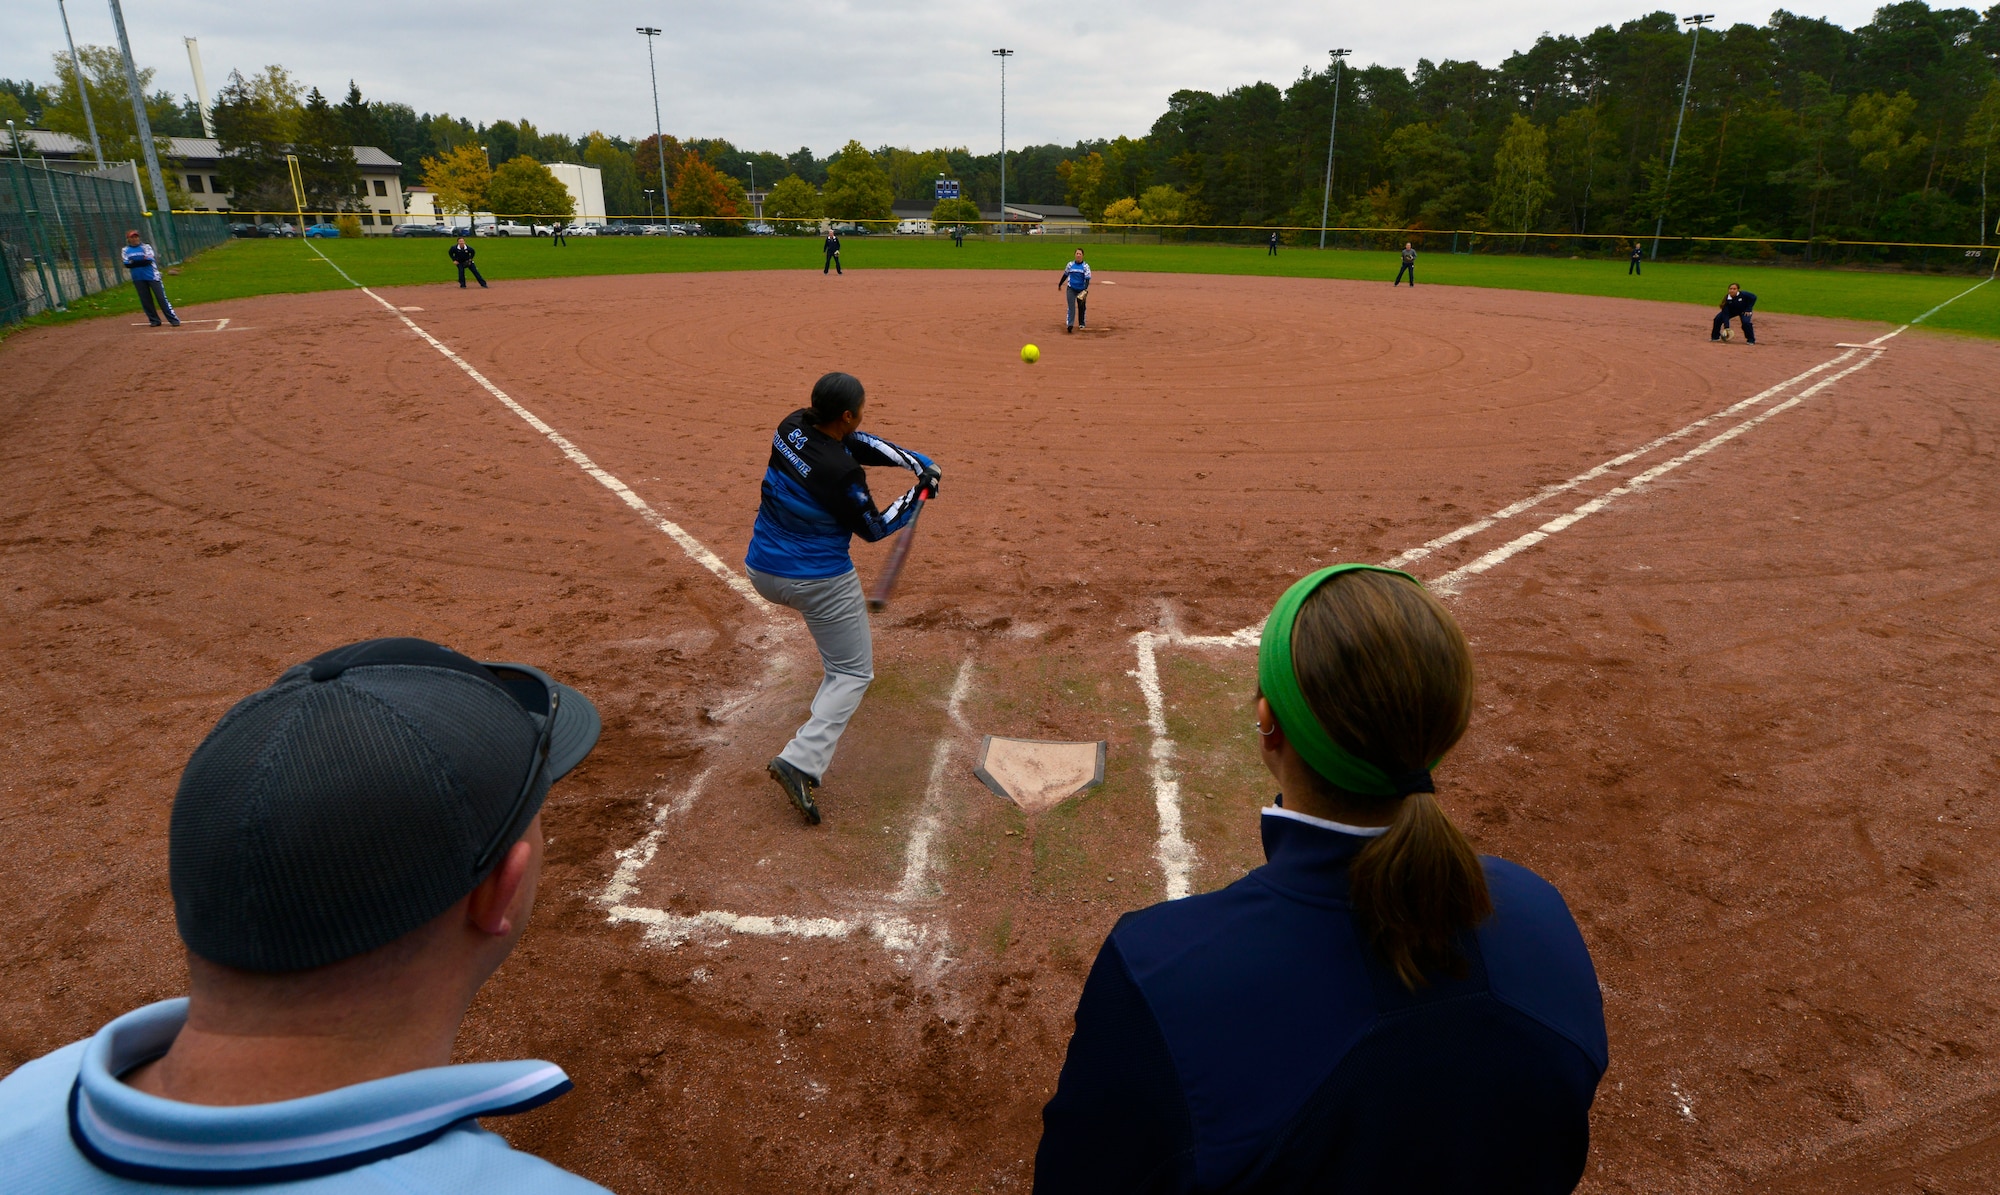 Members of the Ramstein Air Base Lady Rams softball team compete against University of Notre Dame softball players during a scrimmage Oct. 21, 2015, at Ramstein Air Base, Germany. The scrimmage was part of the Notre Dame softball team’s base visit during their 10-day European tour. The Lady Rams defeated Notre Dame by a score of 11-7. (U.S. Air Force photo/Staff Sgt. Sharida Jackson)